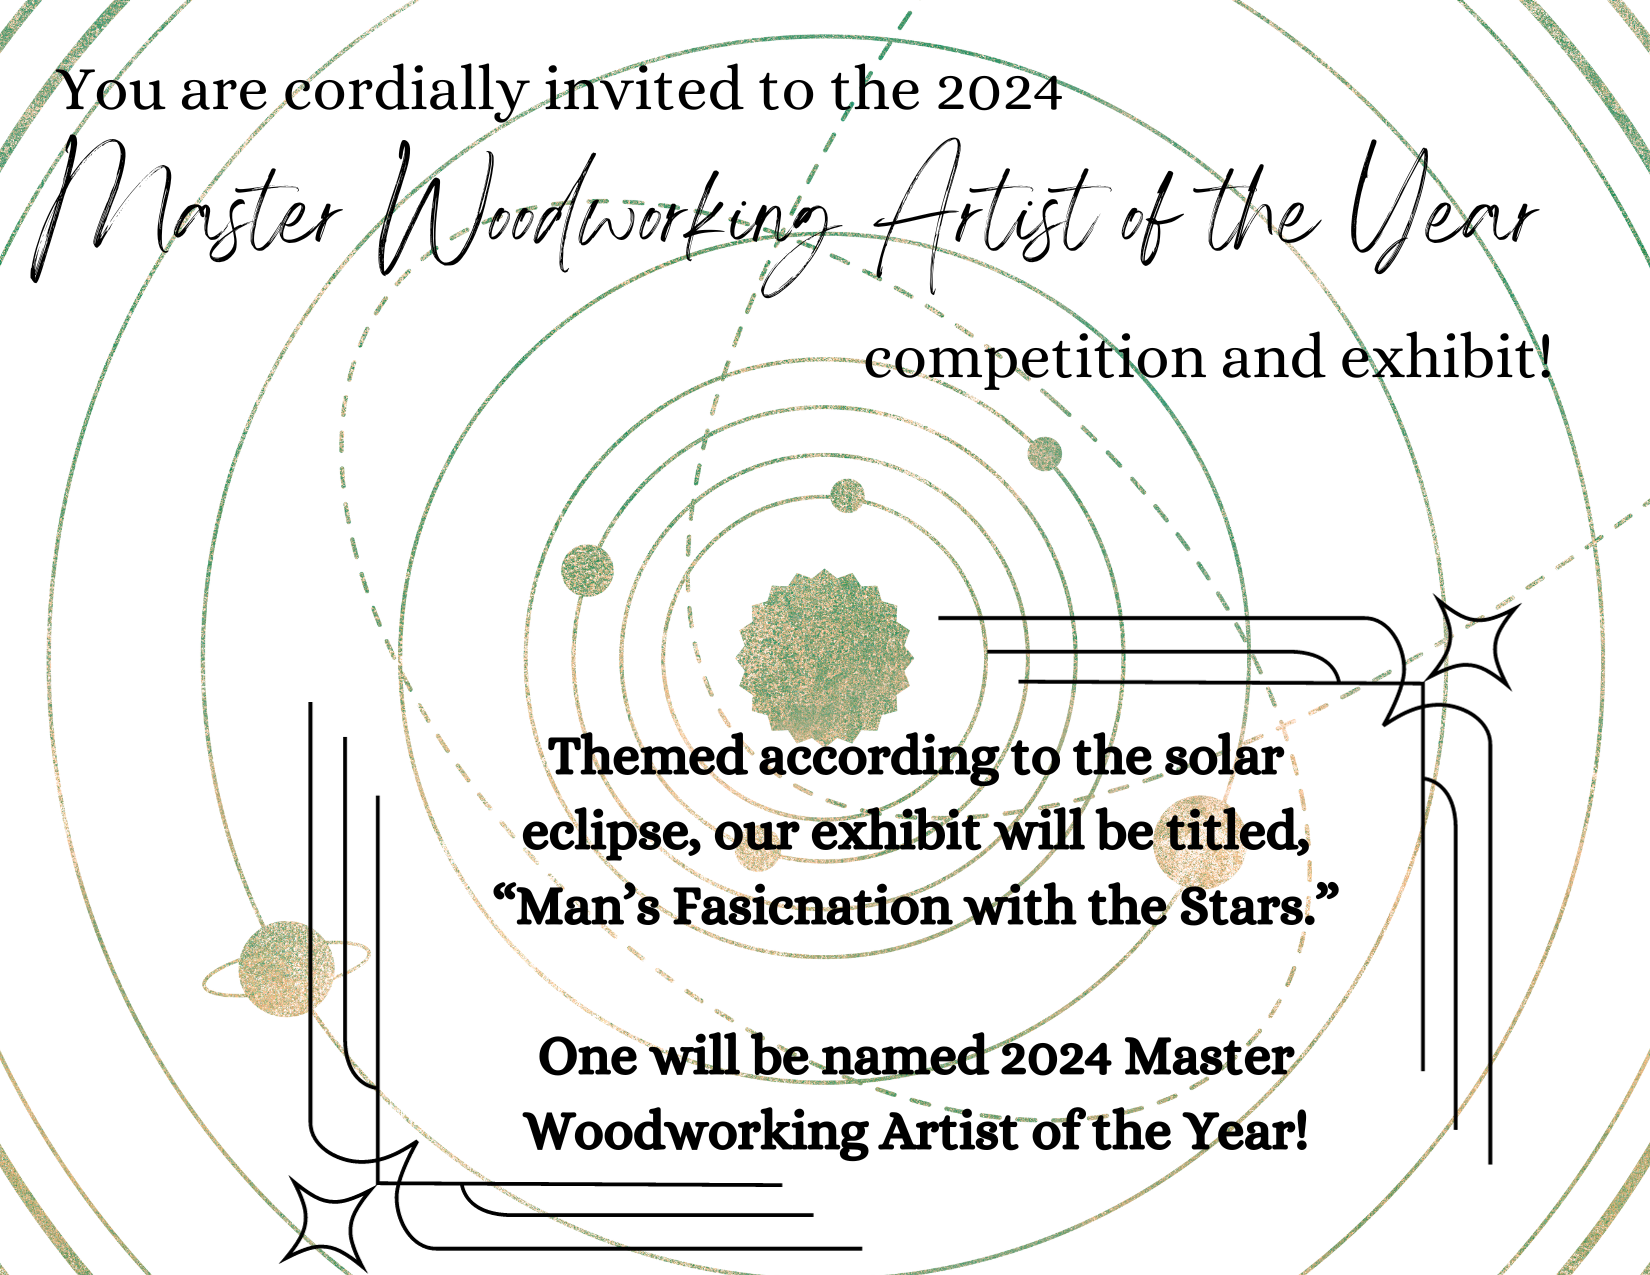 Flyer for master woodworking artist of the year.